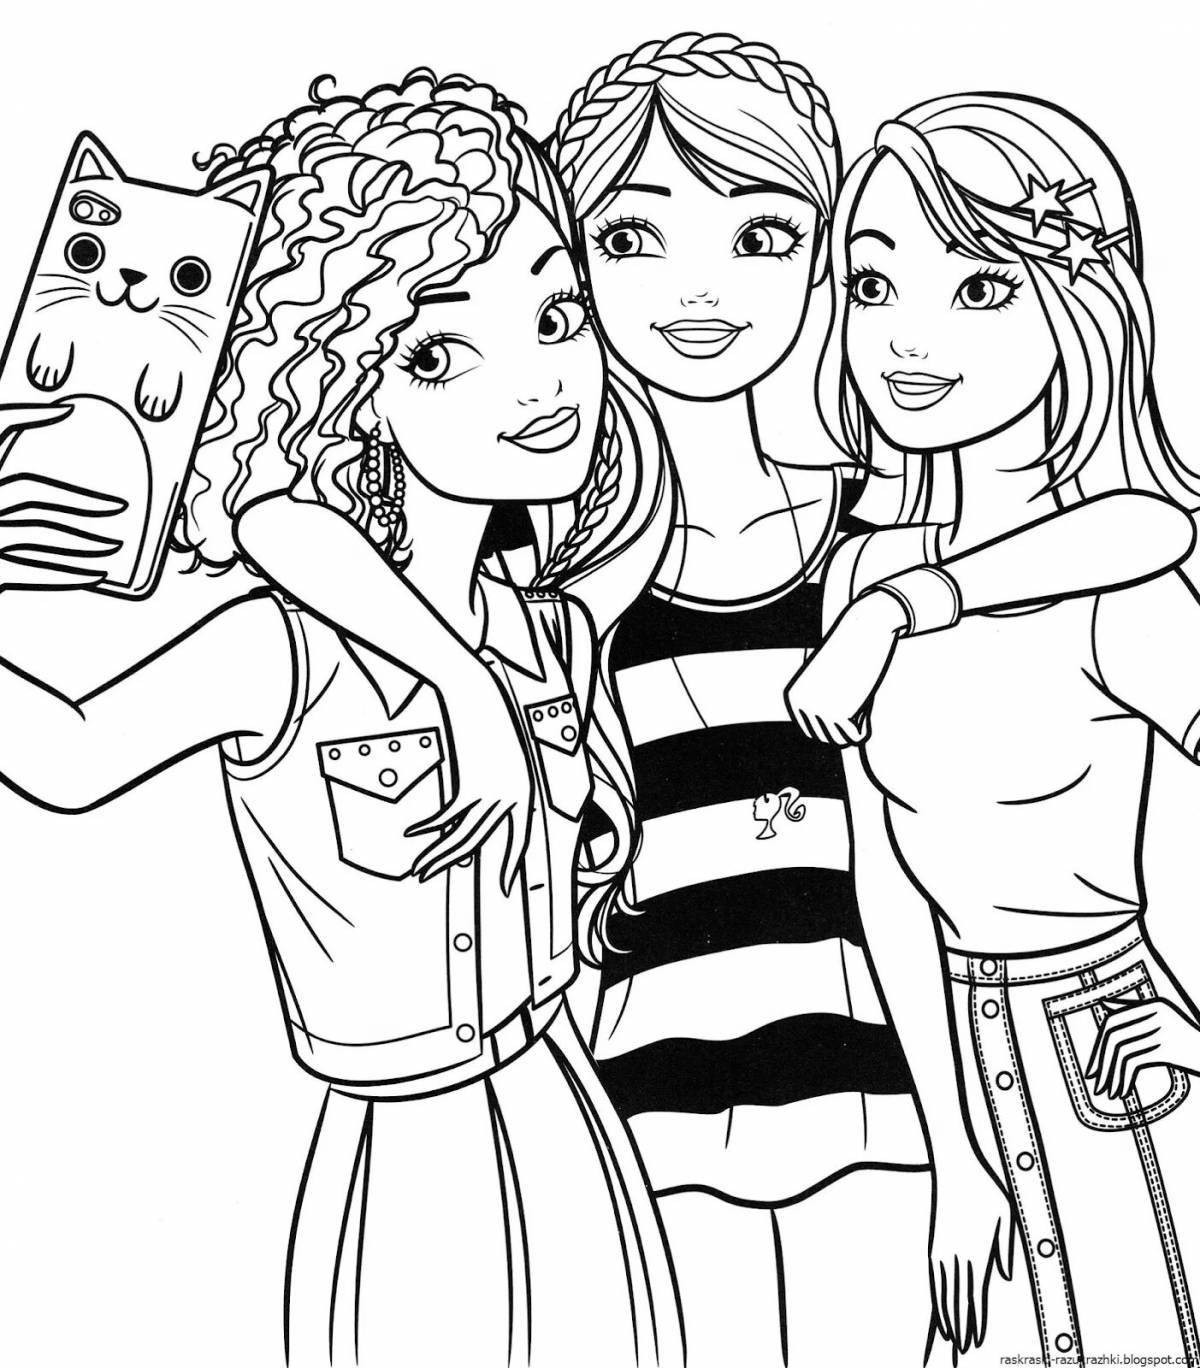 Crazy coloring book for girls 15-17 years old